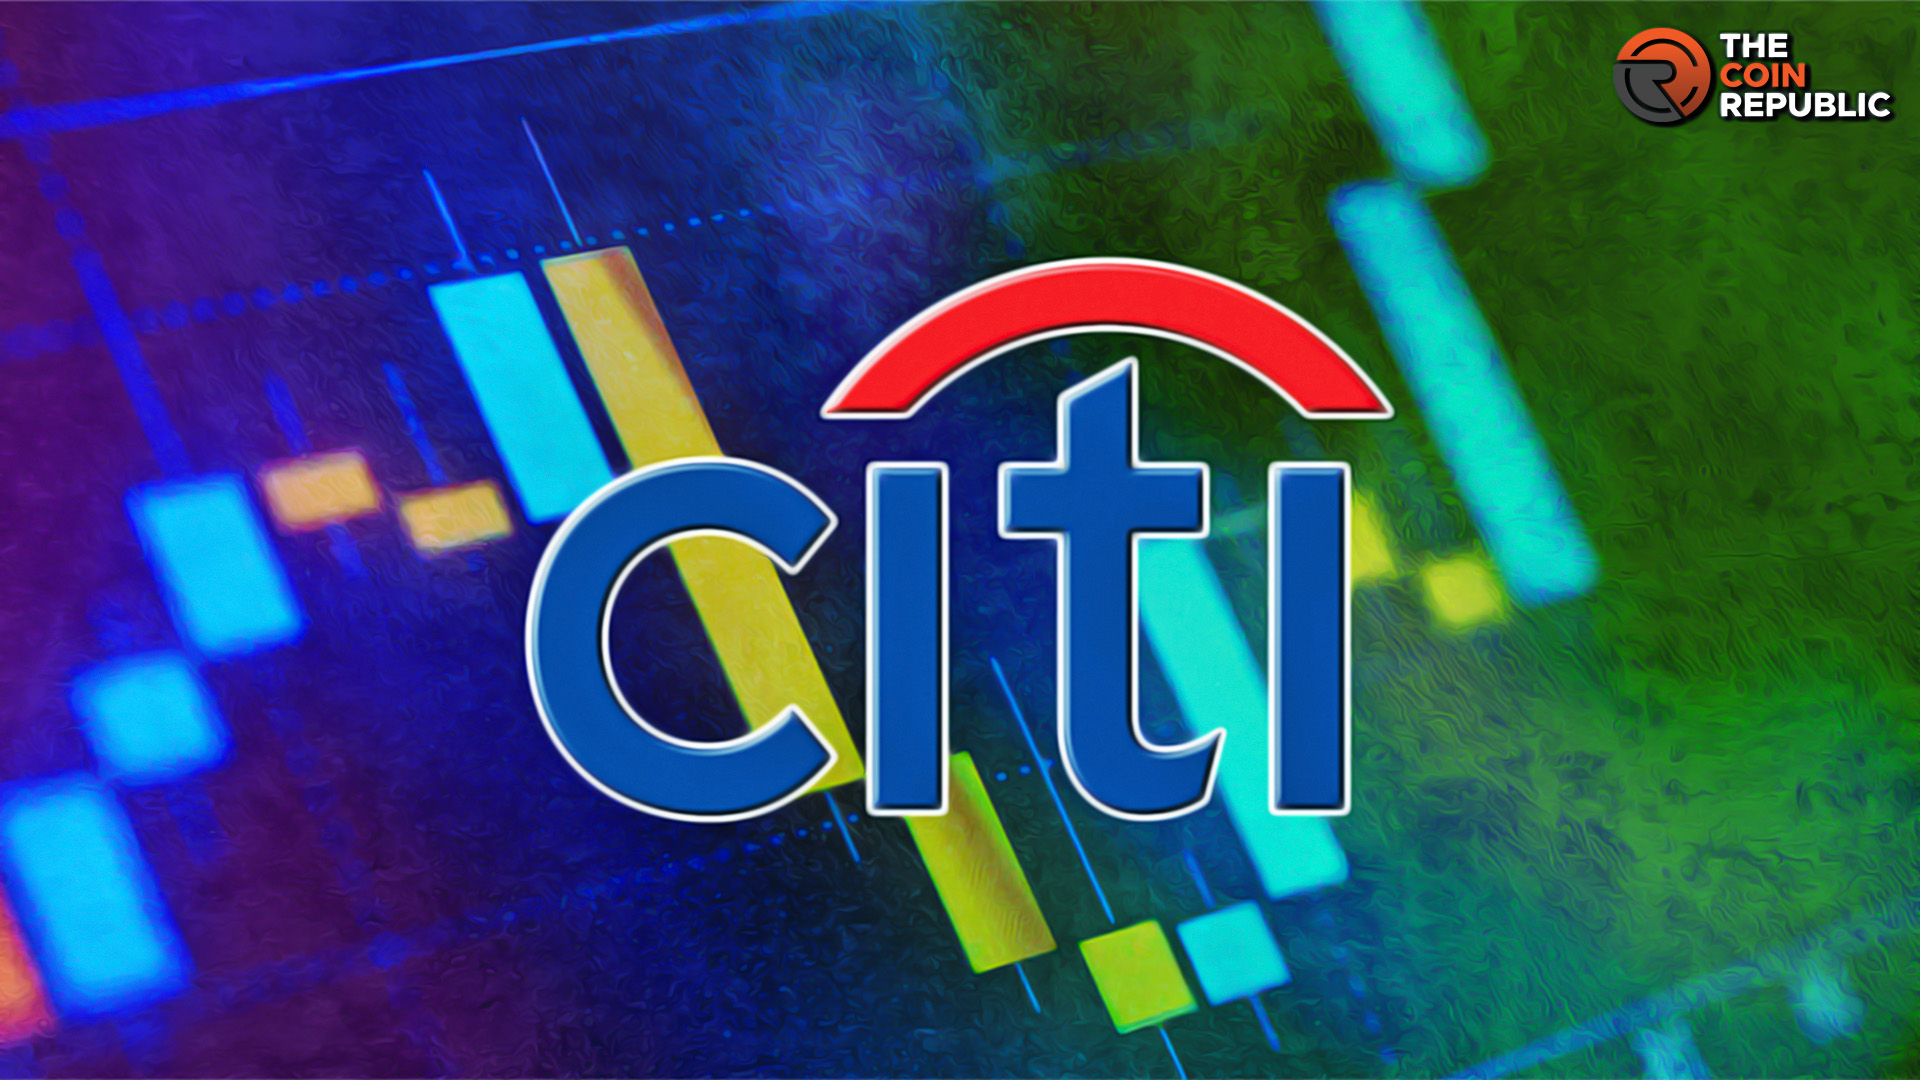 Citigroup Stock: C Stock Price Hits 52-Week Low; What’s Next?